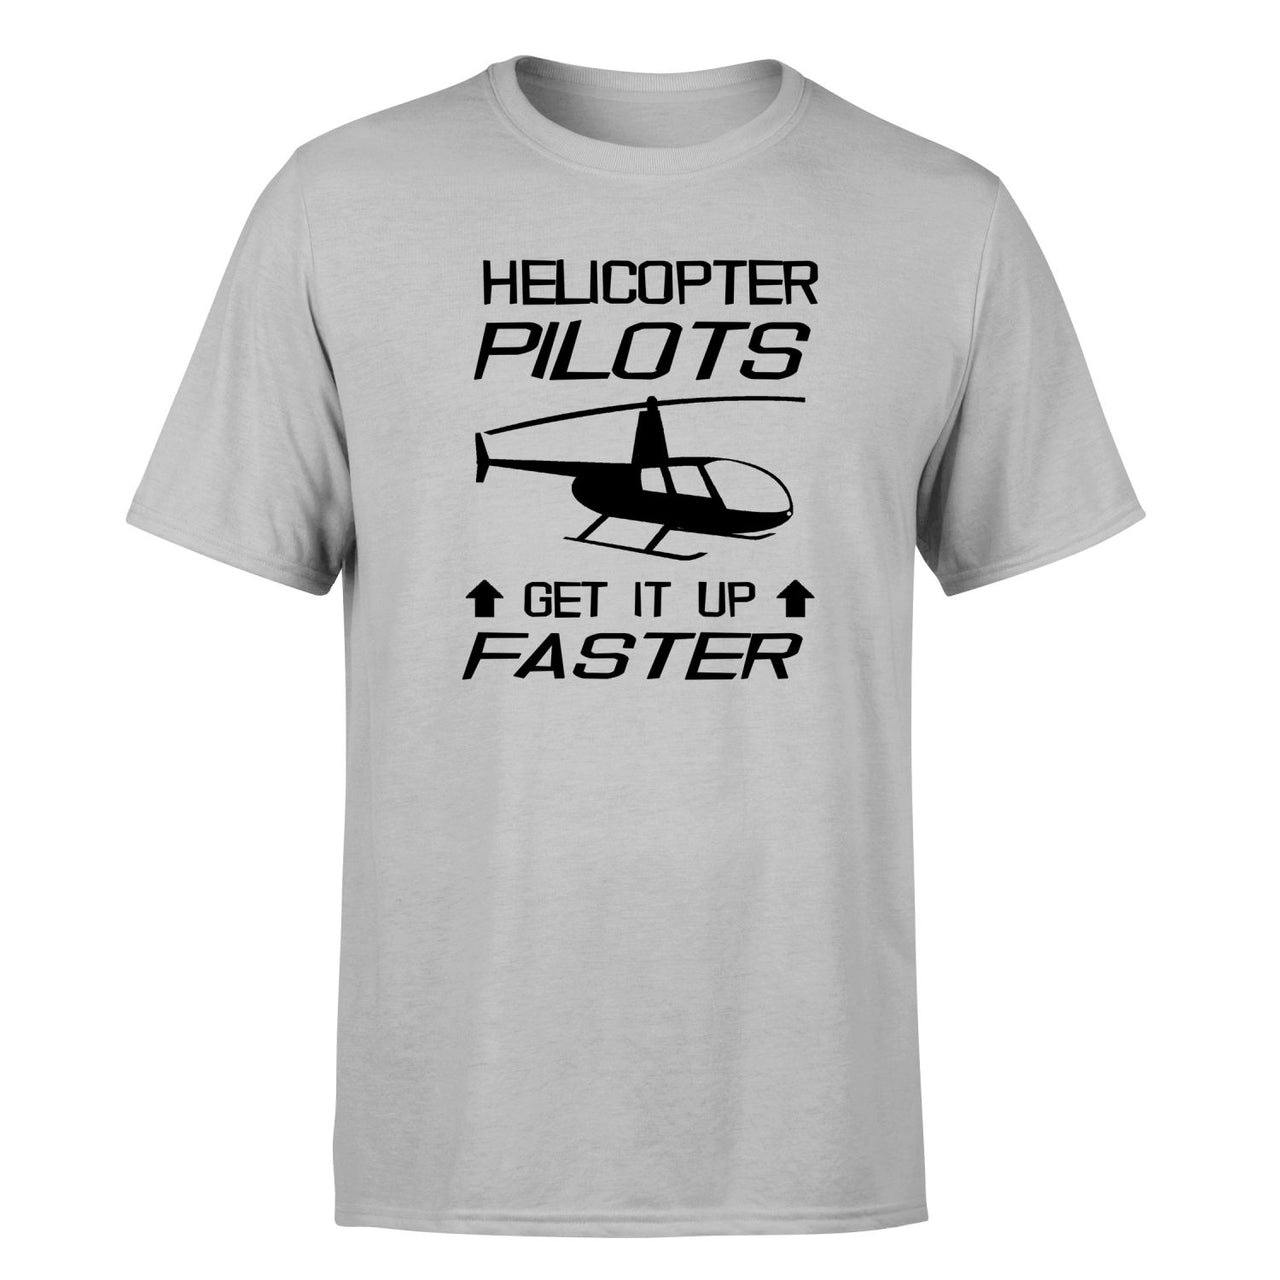 Helicopter Pilots Get It Up Faster Designed T-Shirts